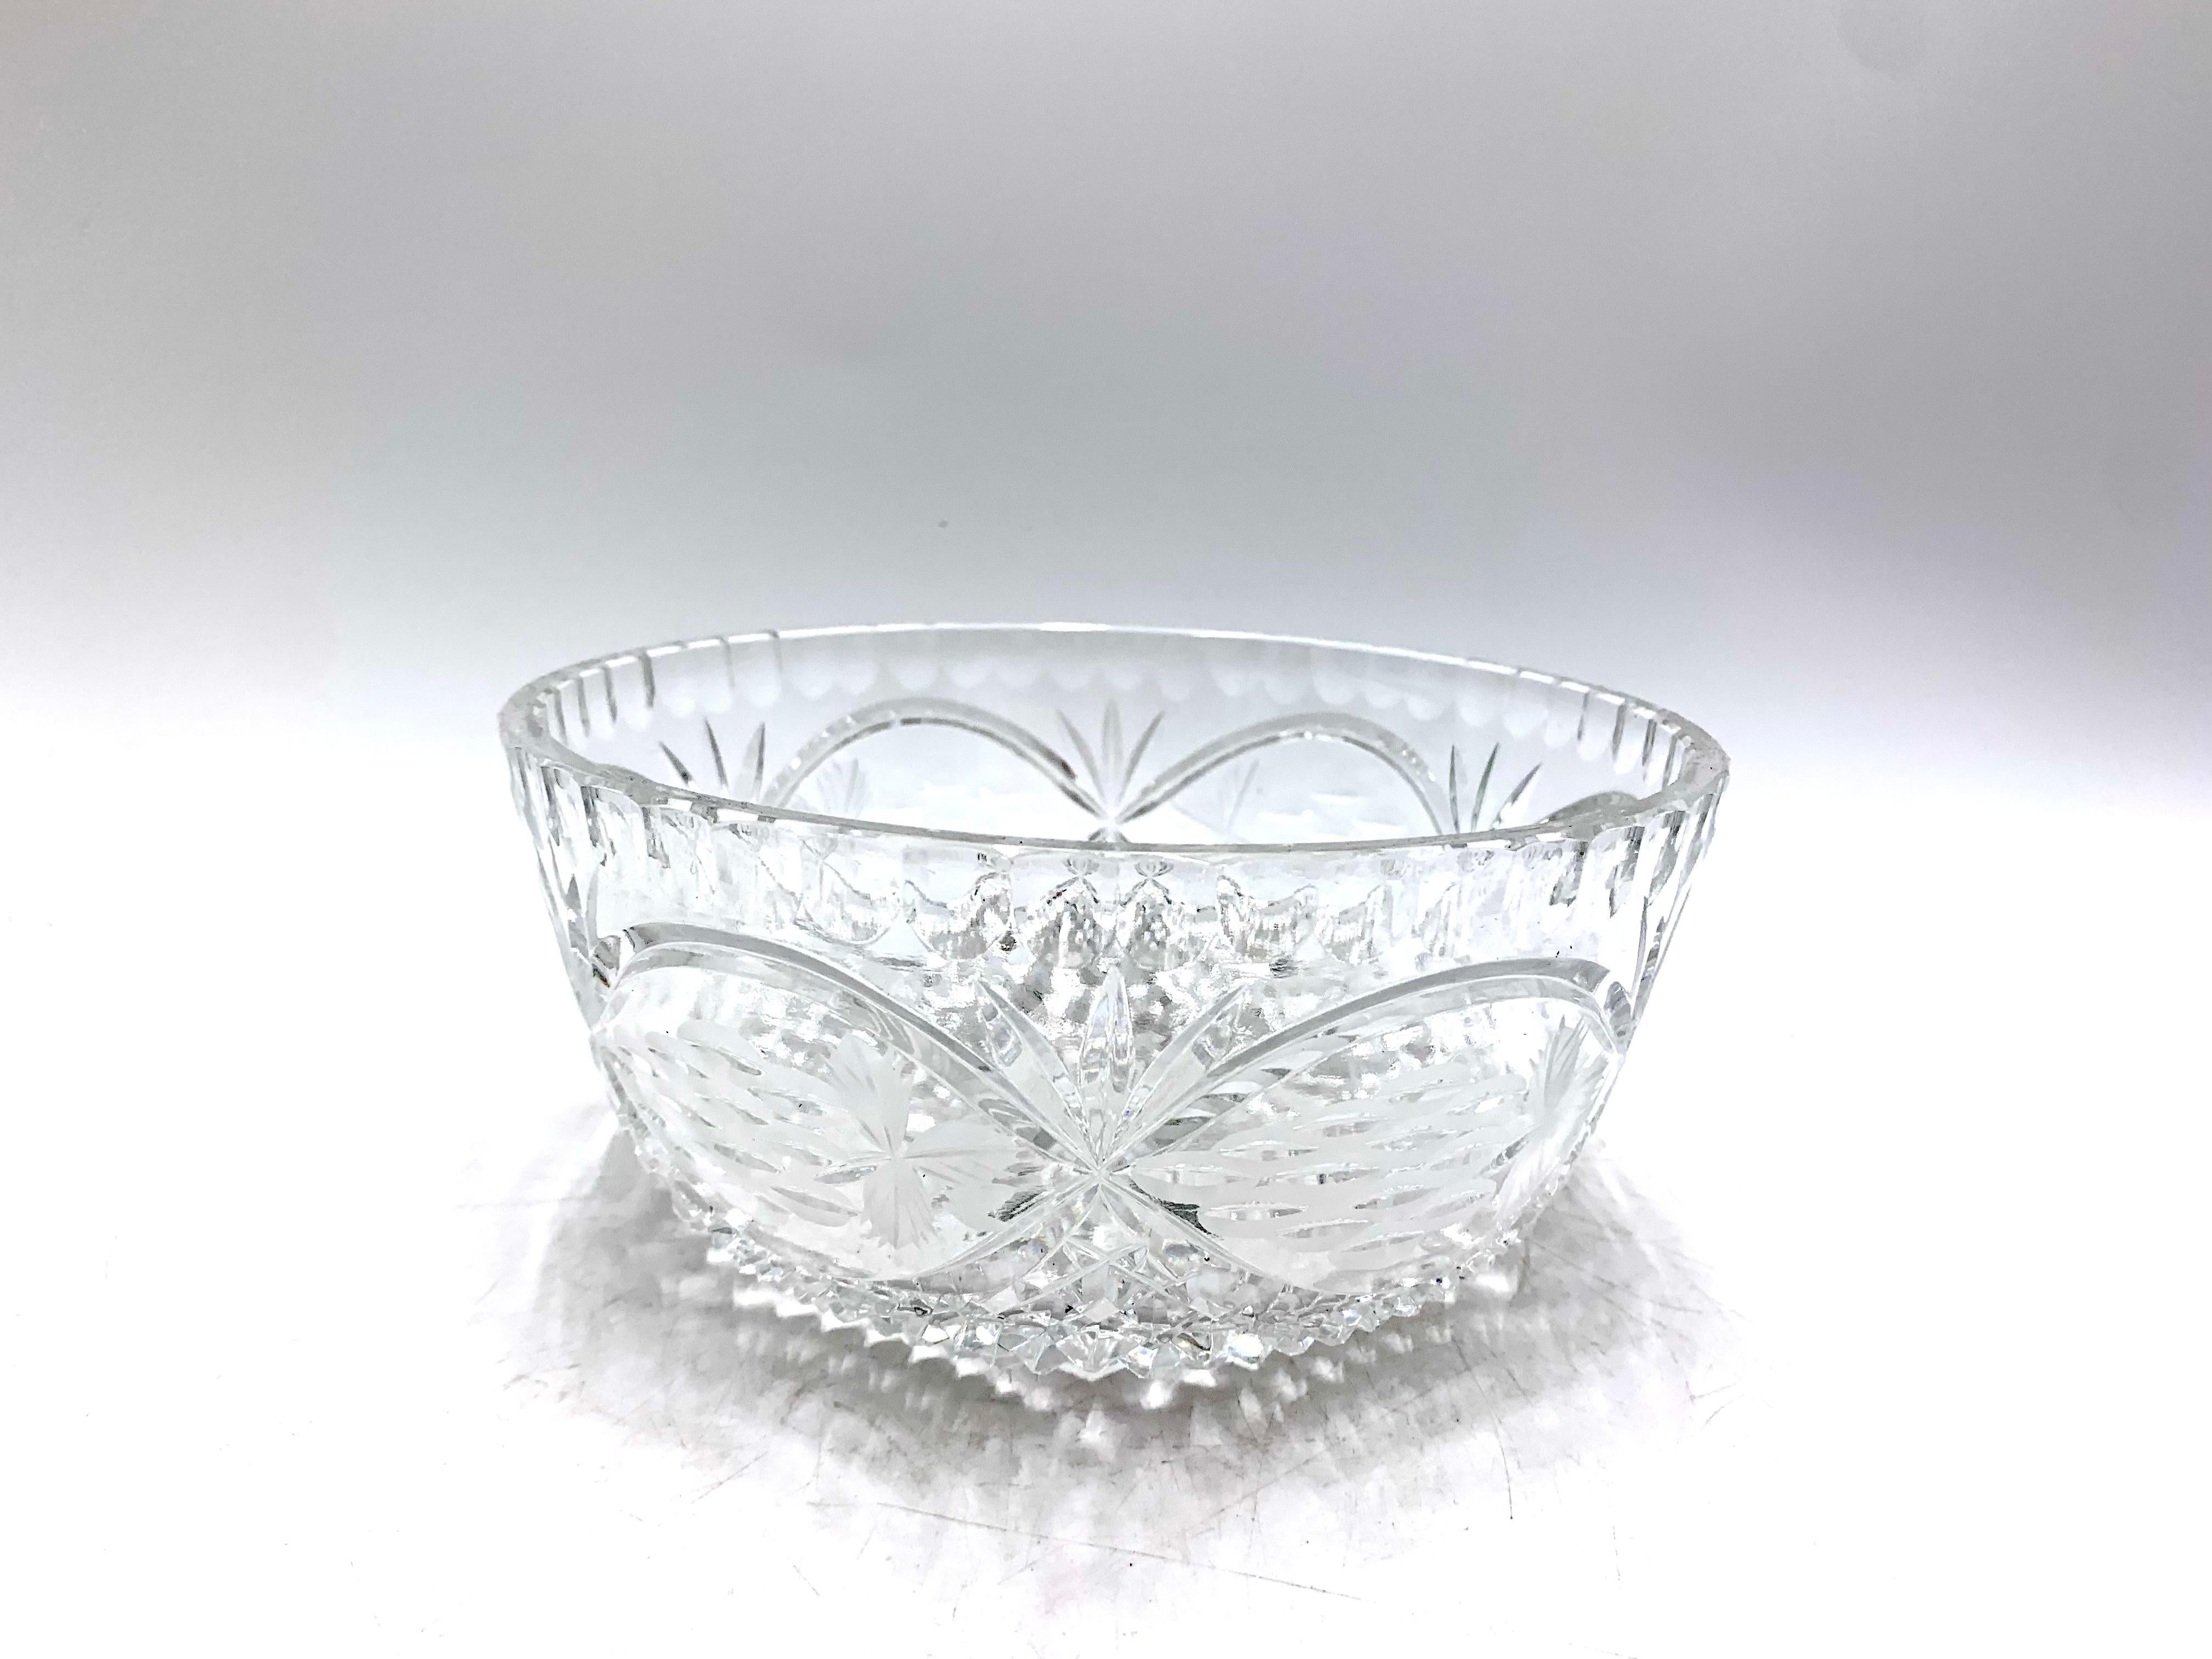 Glass decorative bowl produced in Poland in circa 1960s. Preserved in very good condition.